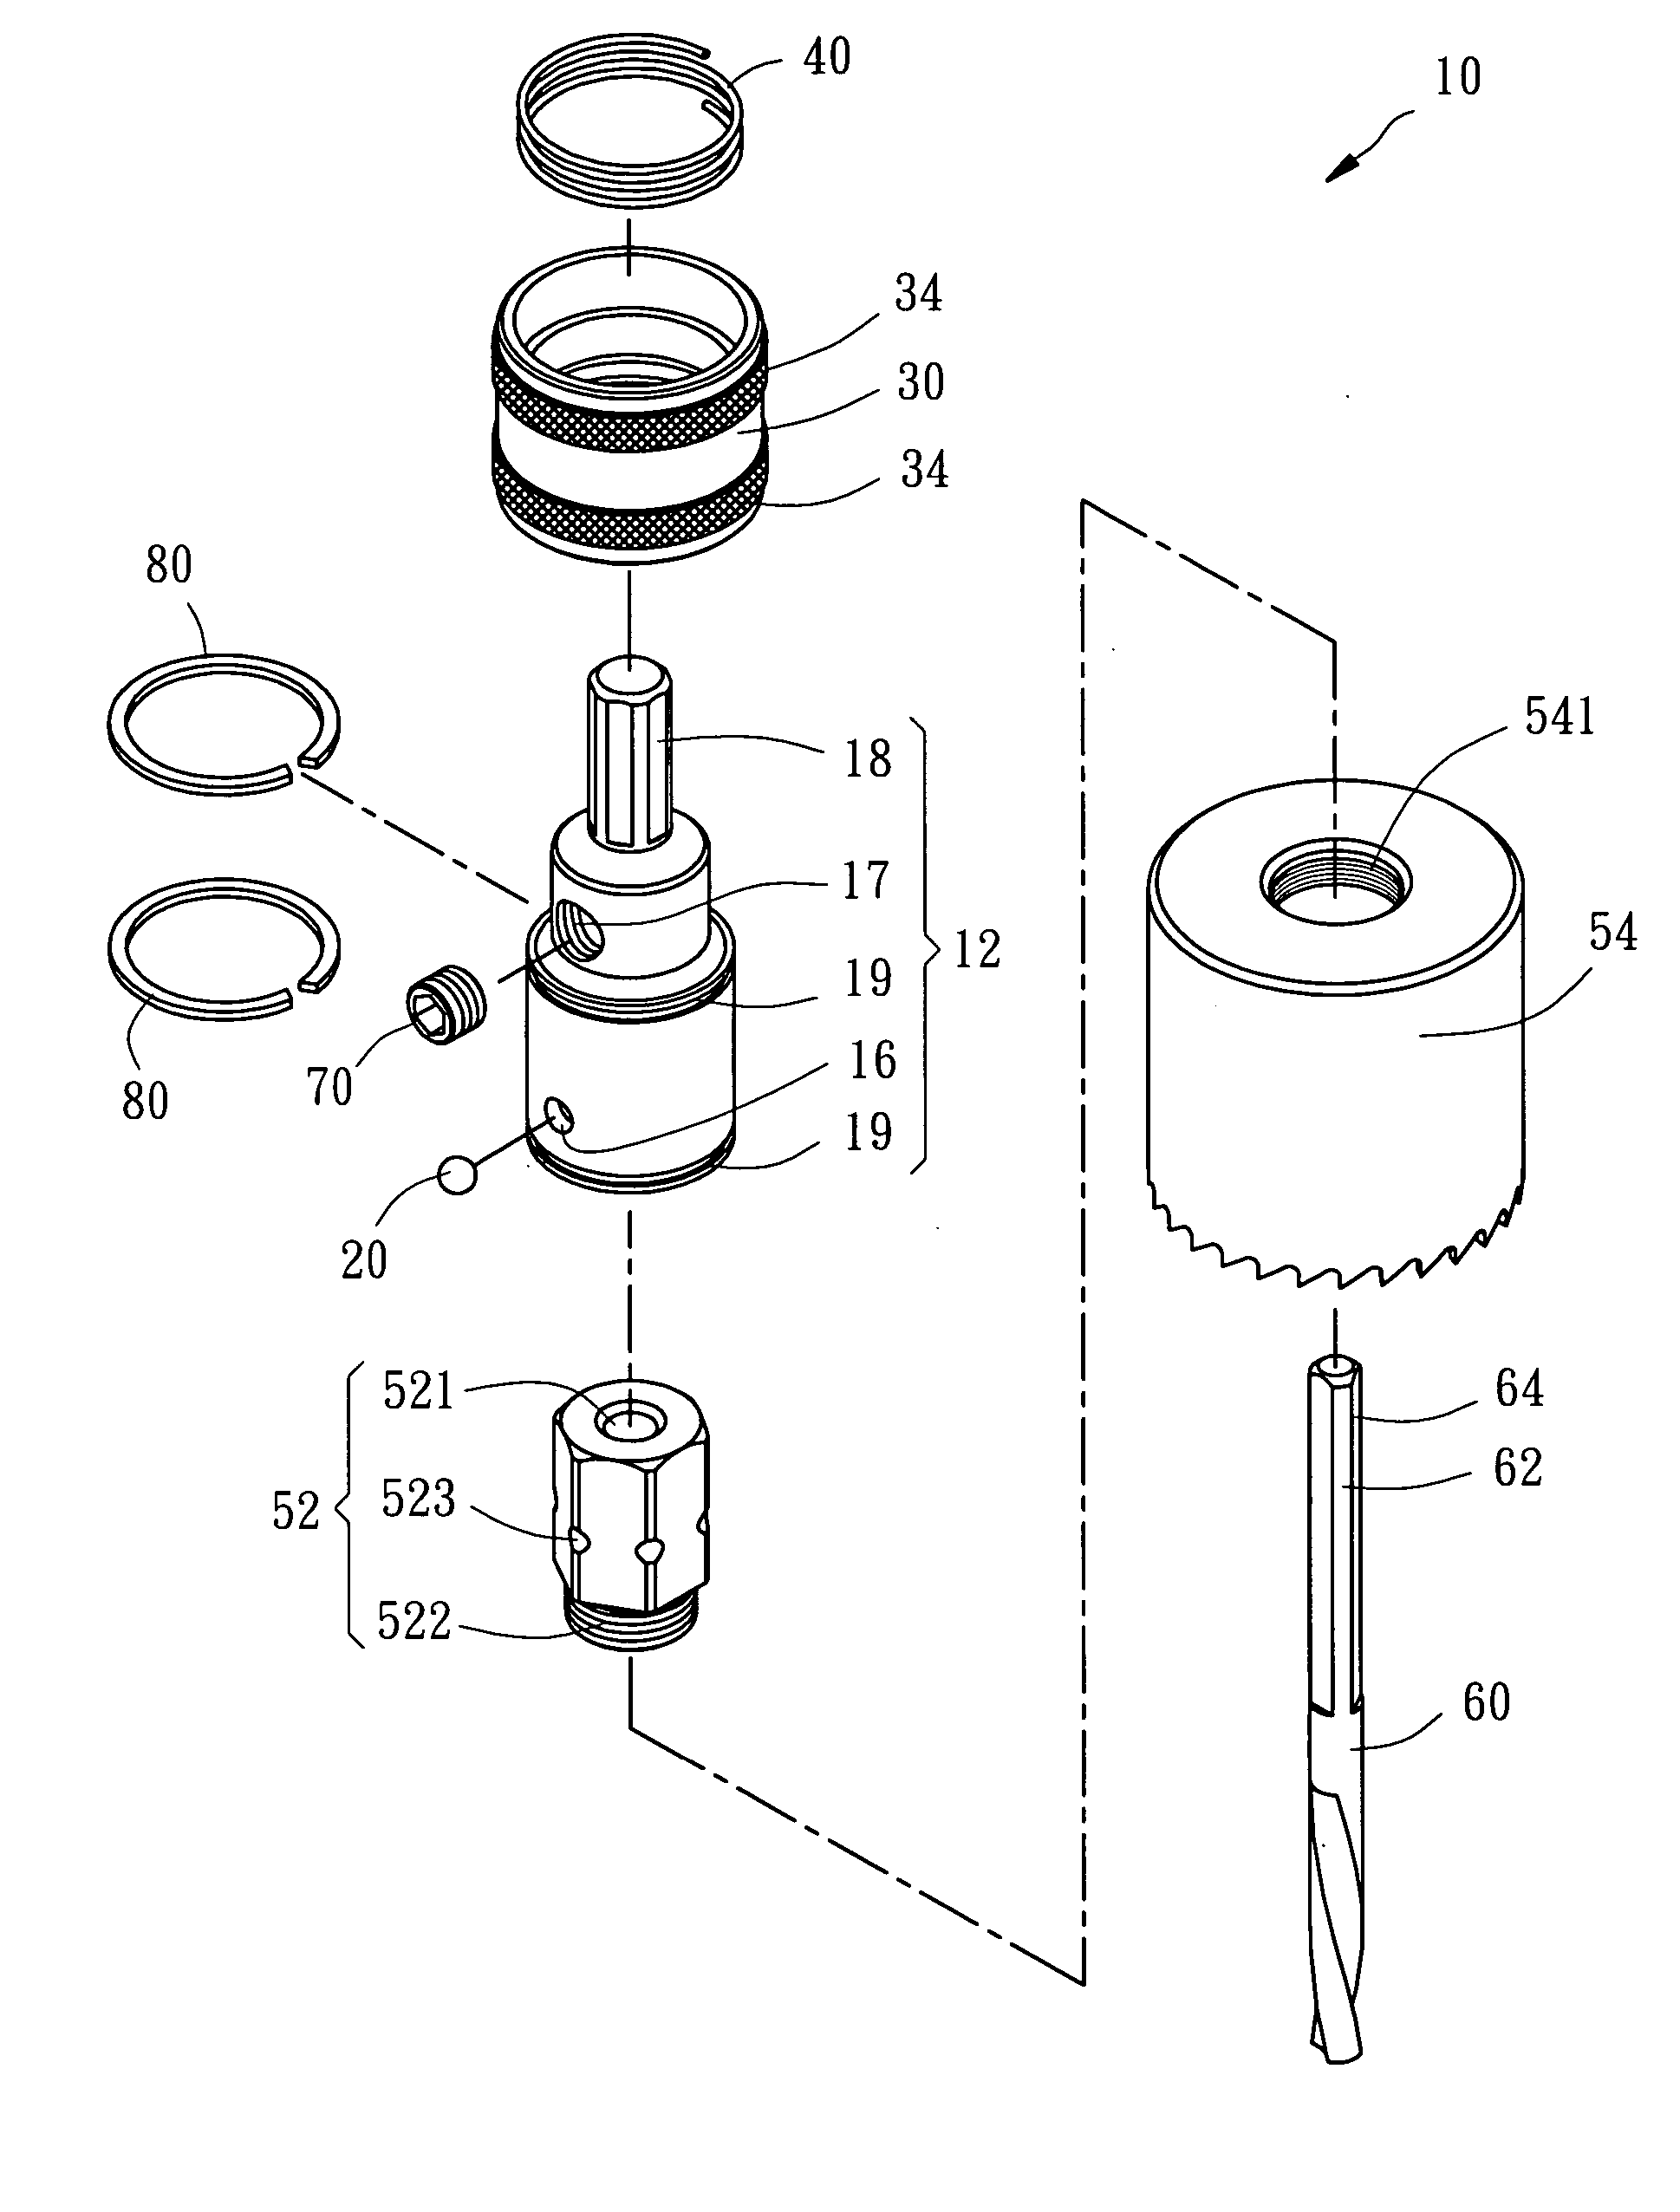 Hole cutter having detachable hole-sawing blade